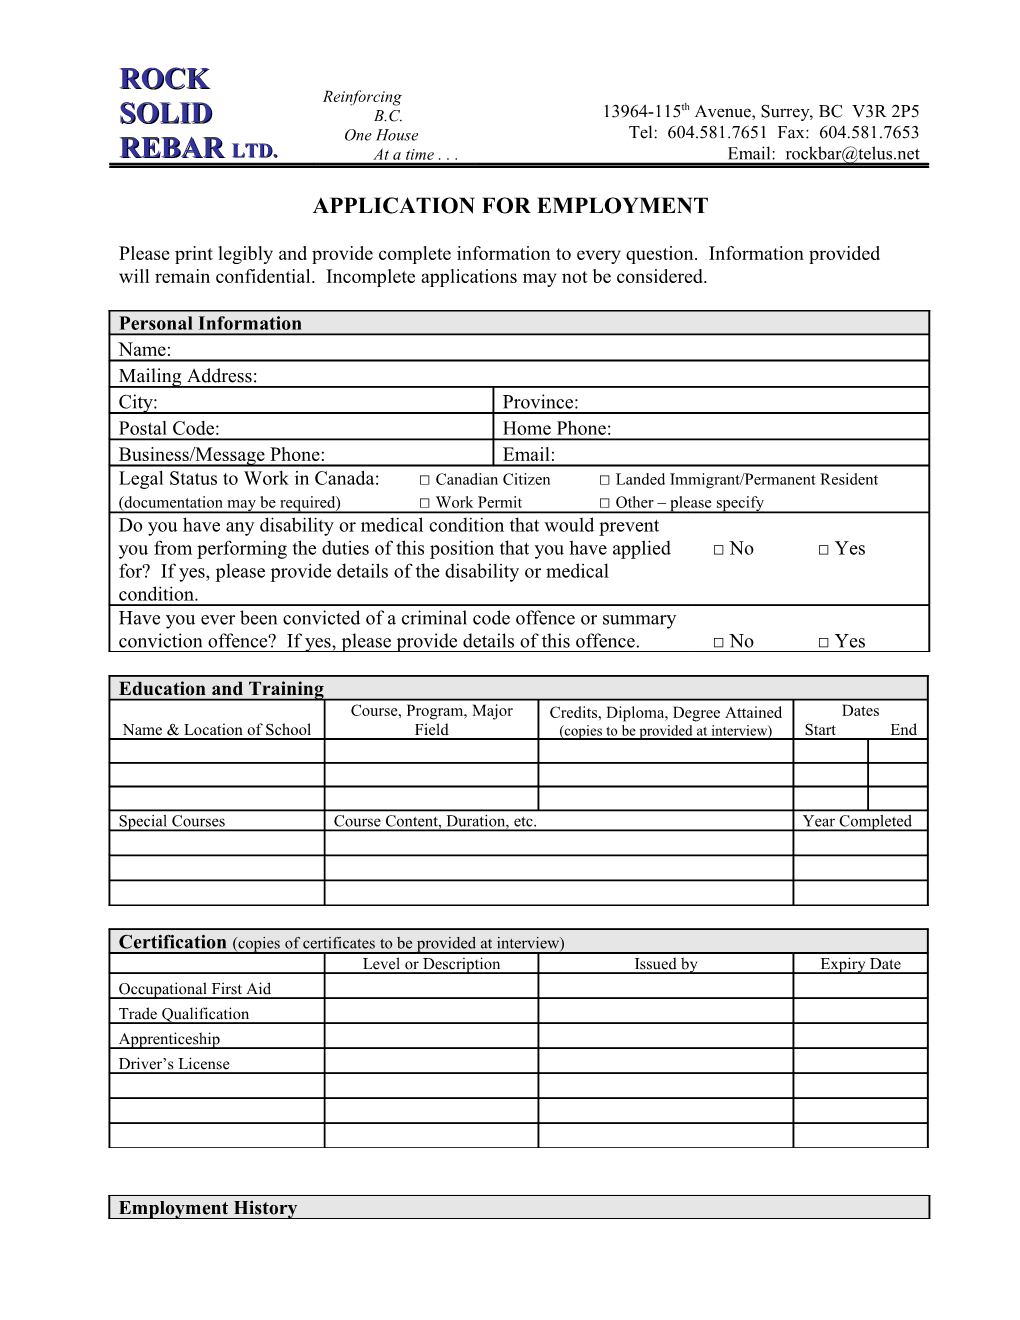 Application for Employment s7